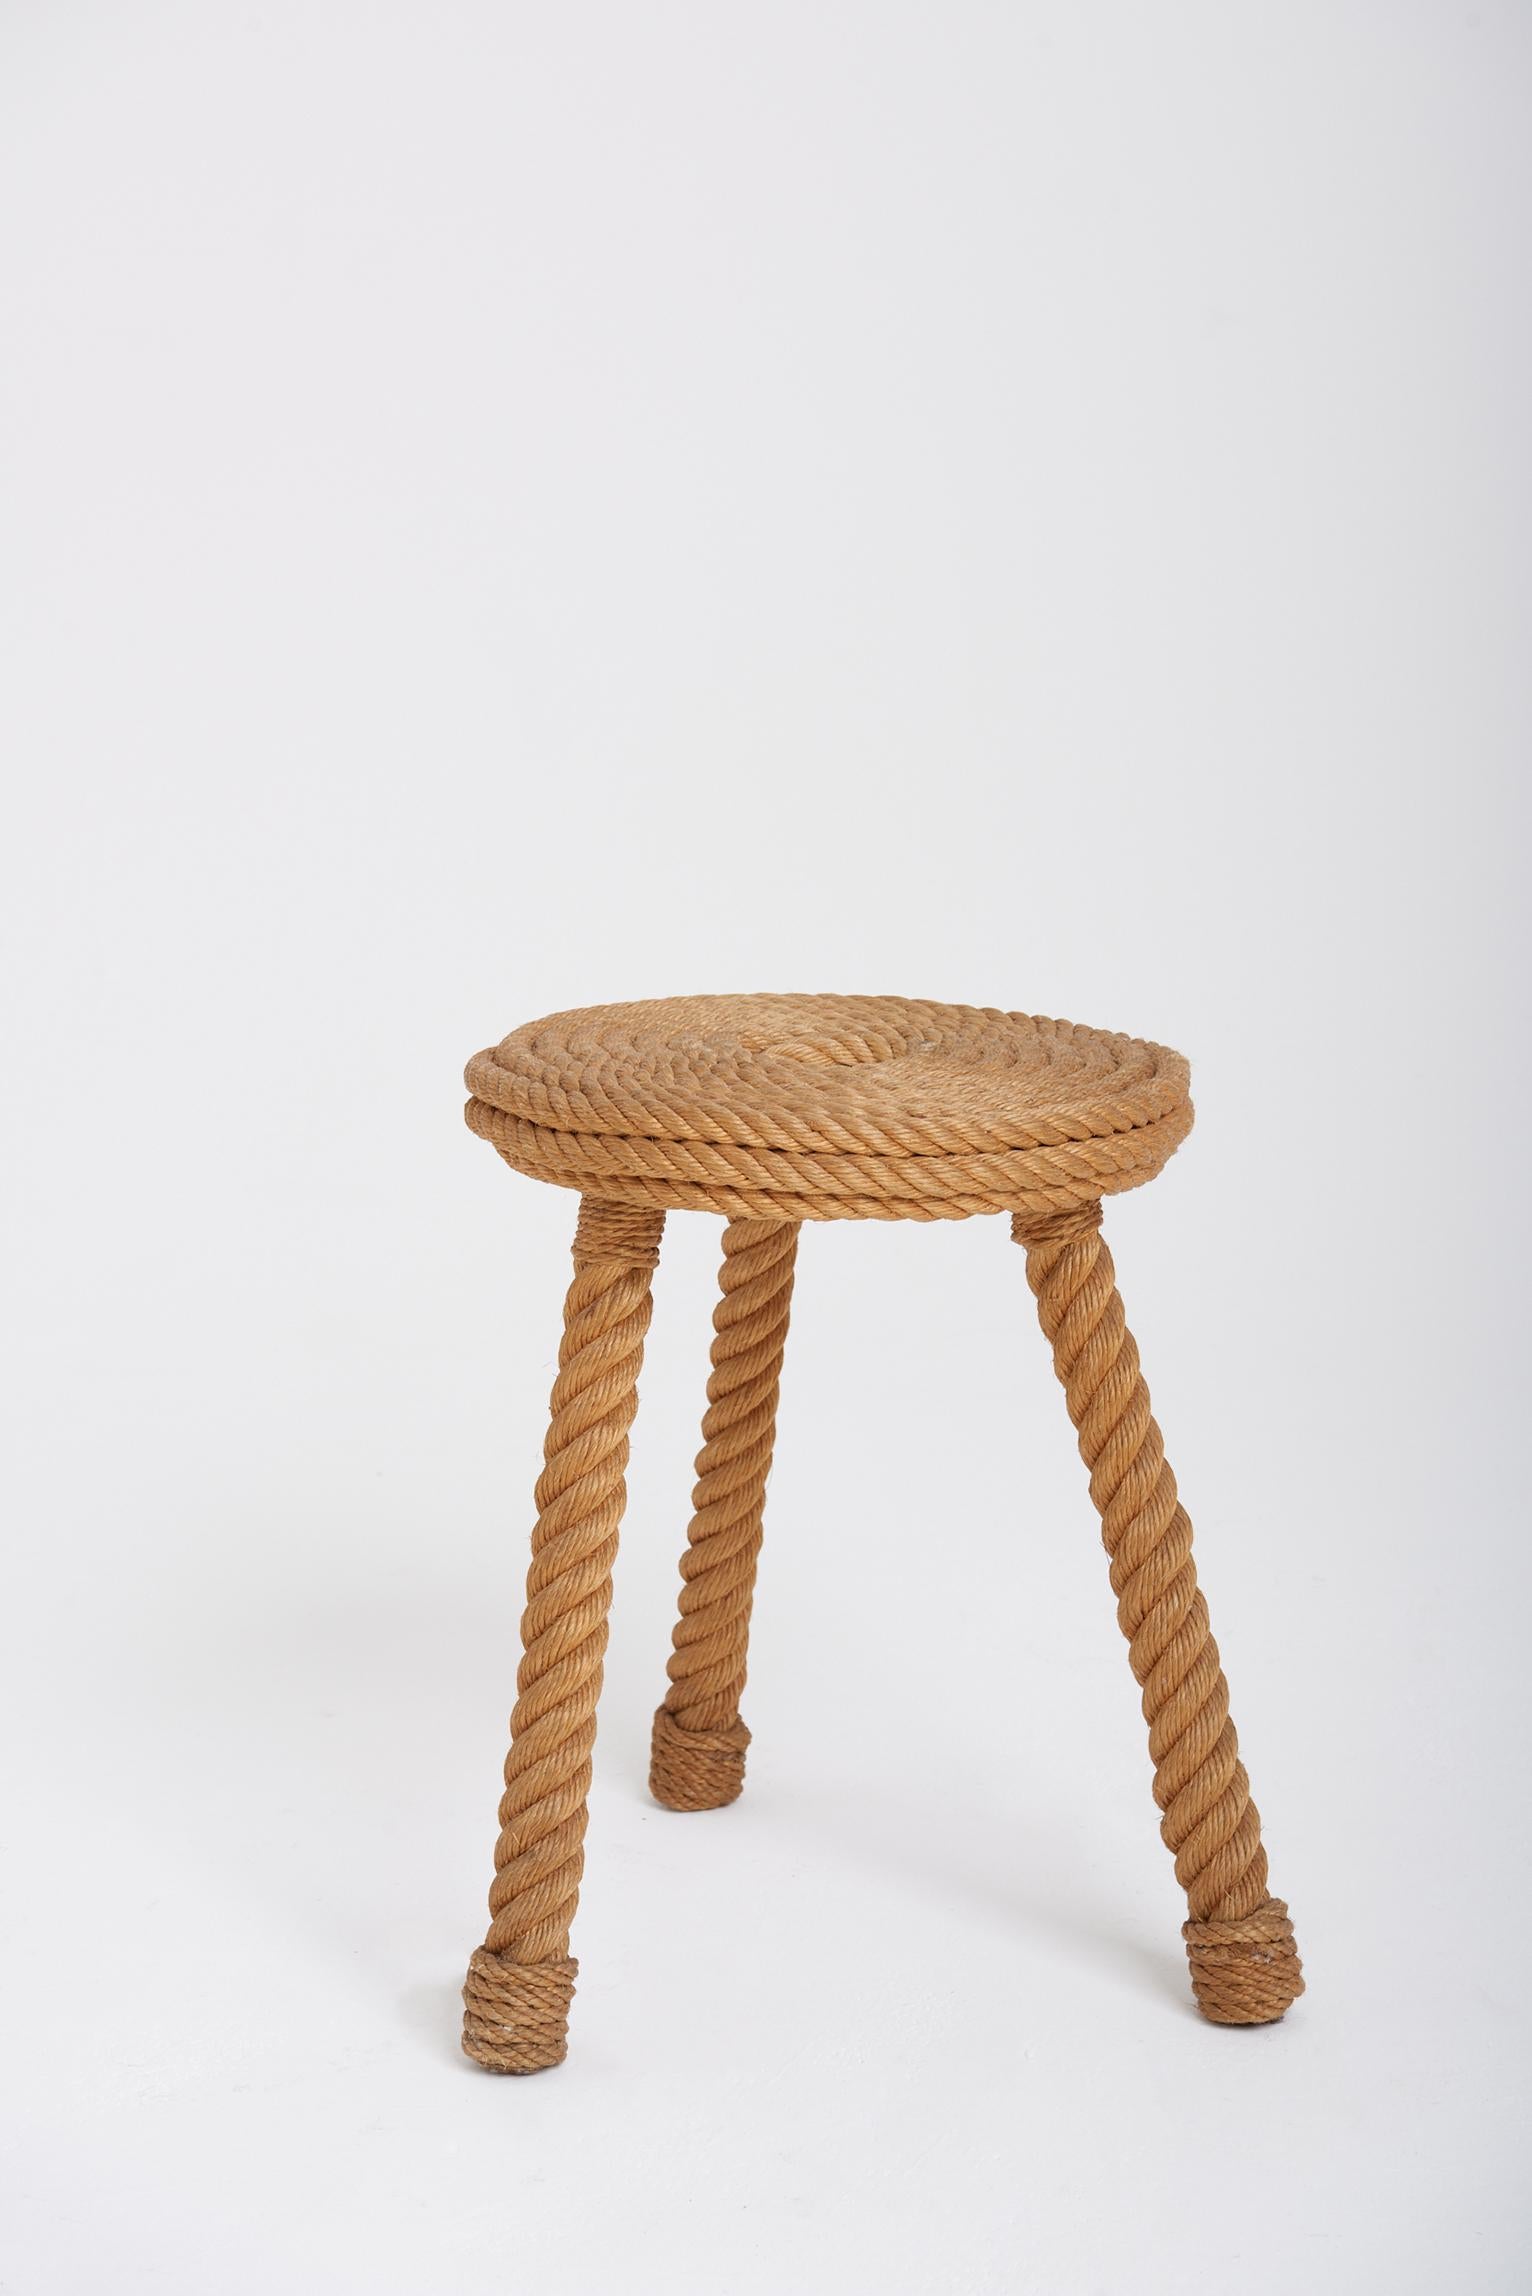 A rare rope stool (or side table) by Adrien Audoux and Frida Minet,
France, 1950s.